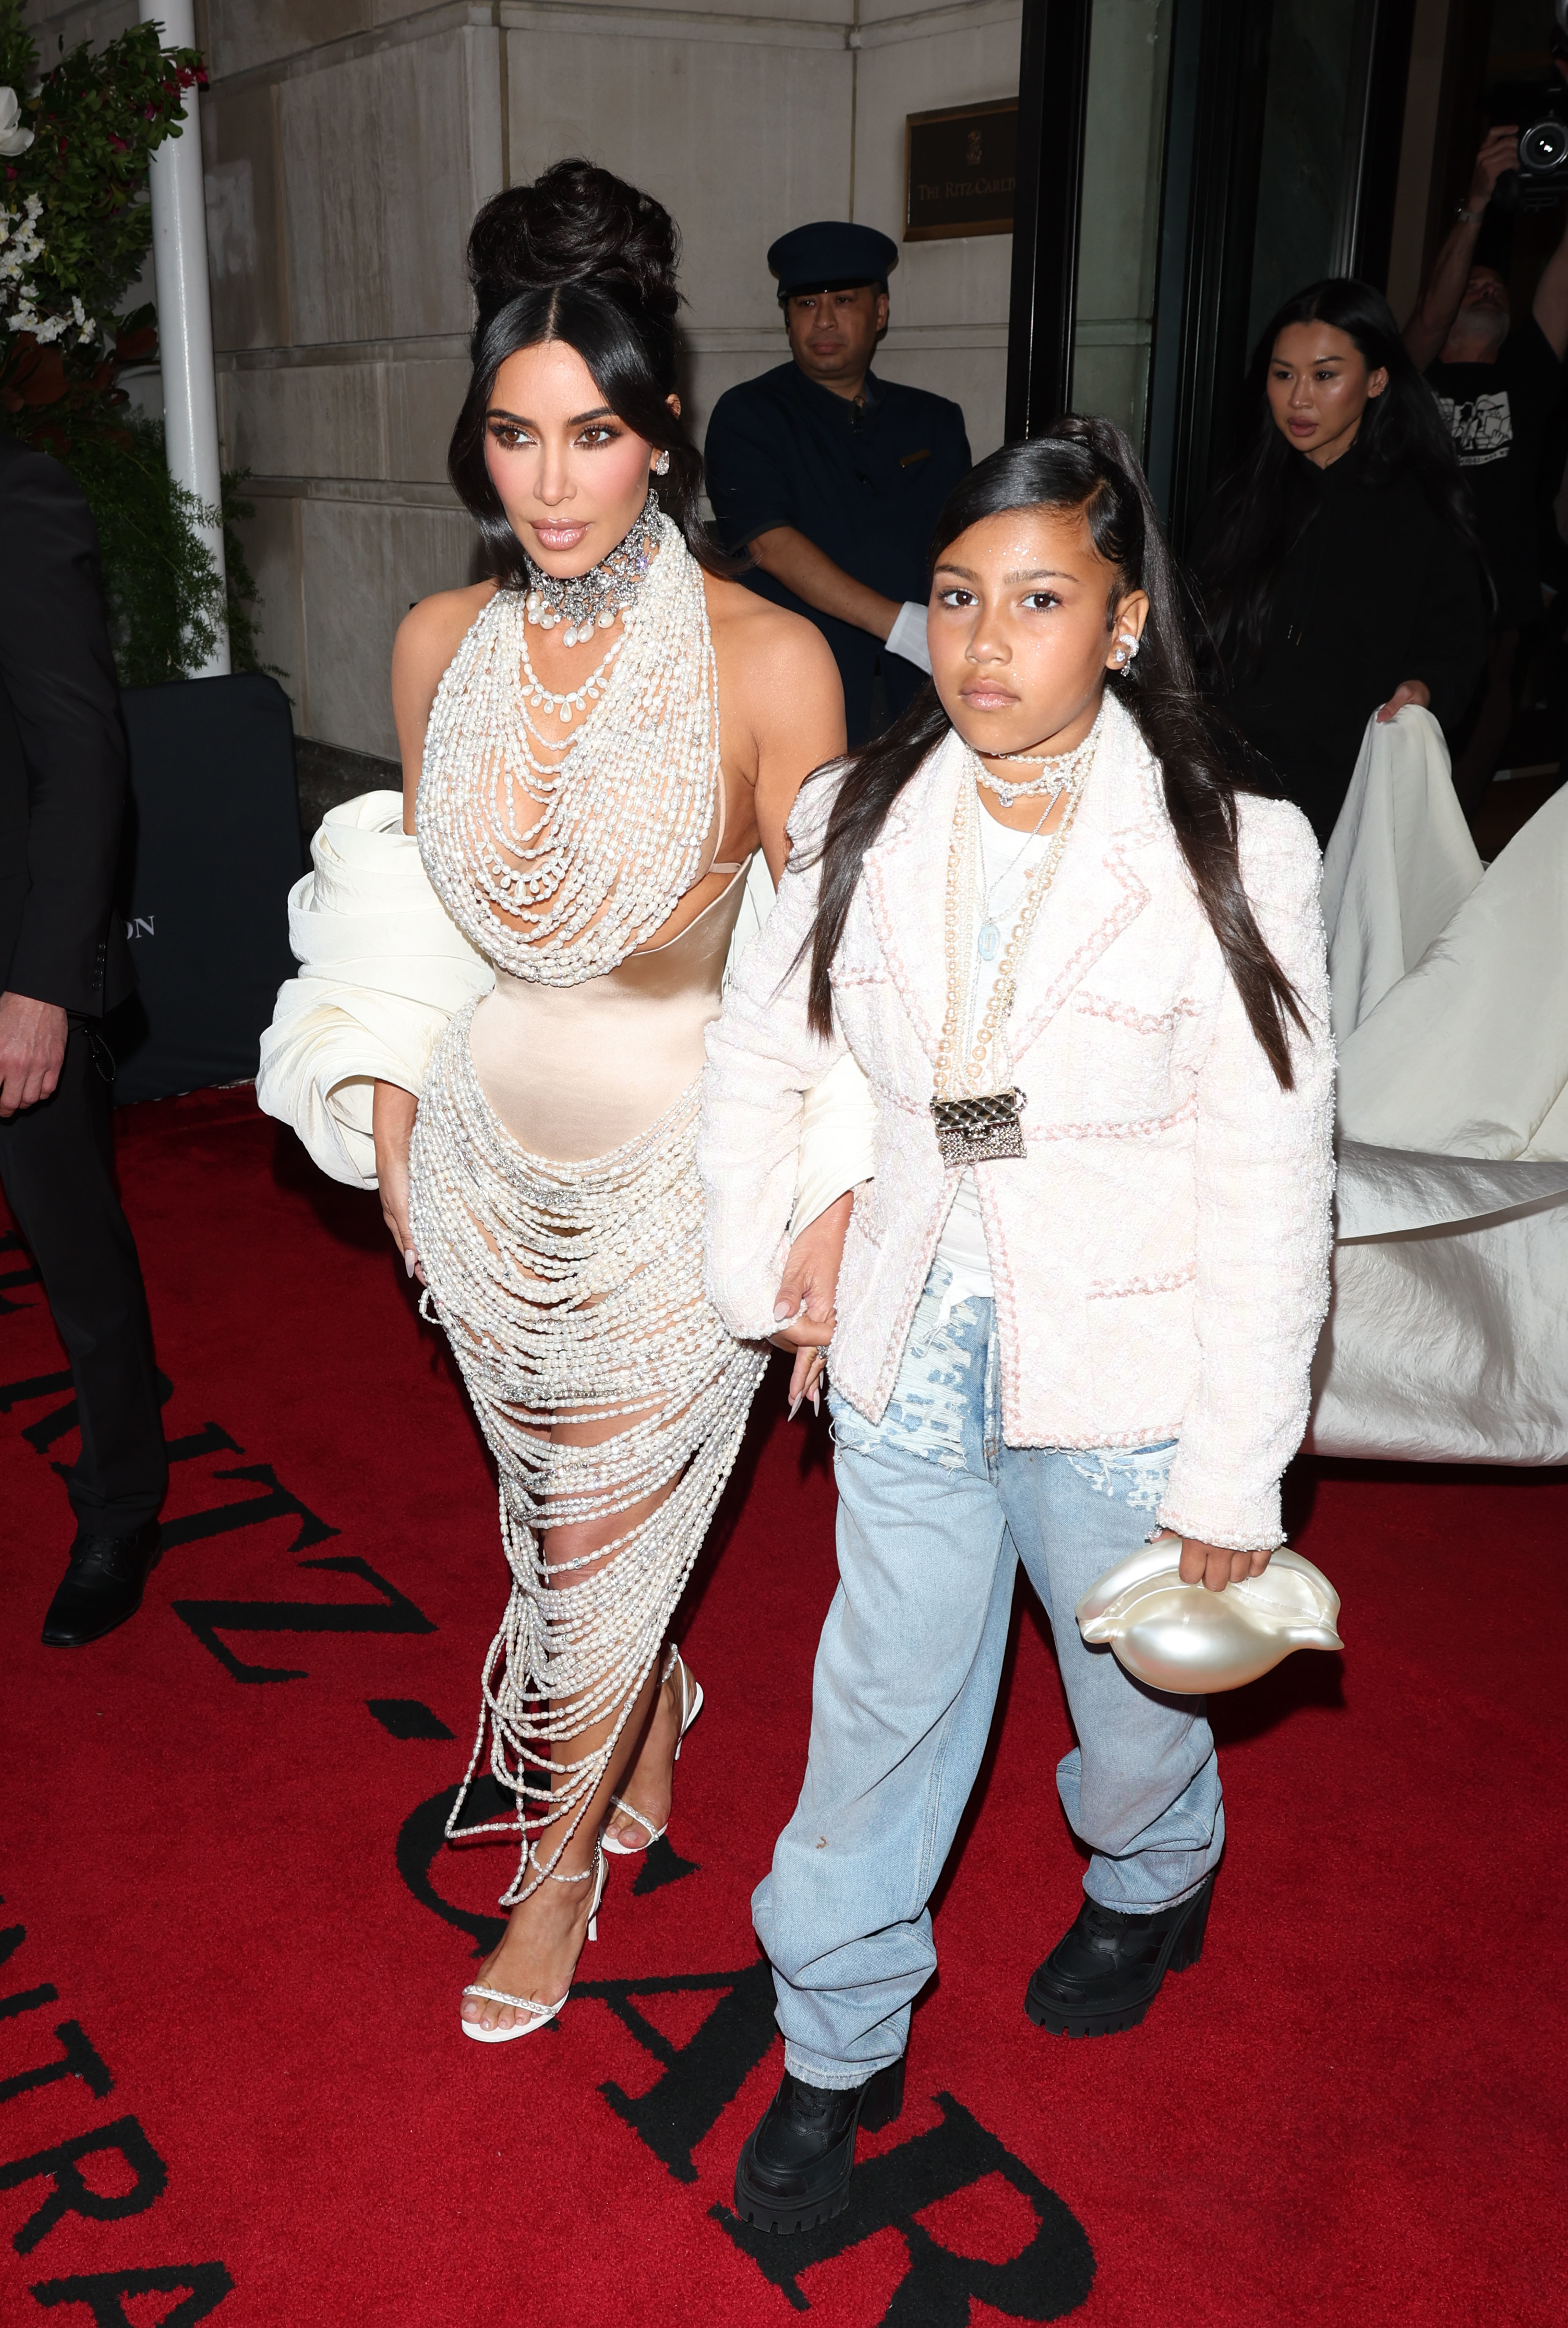 Kim Kardashian and North West walking out of a hotel on the way to an event